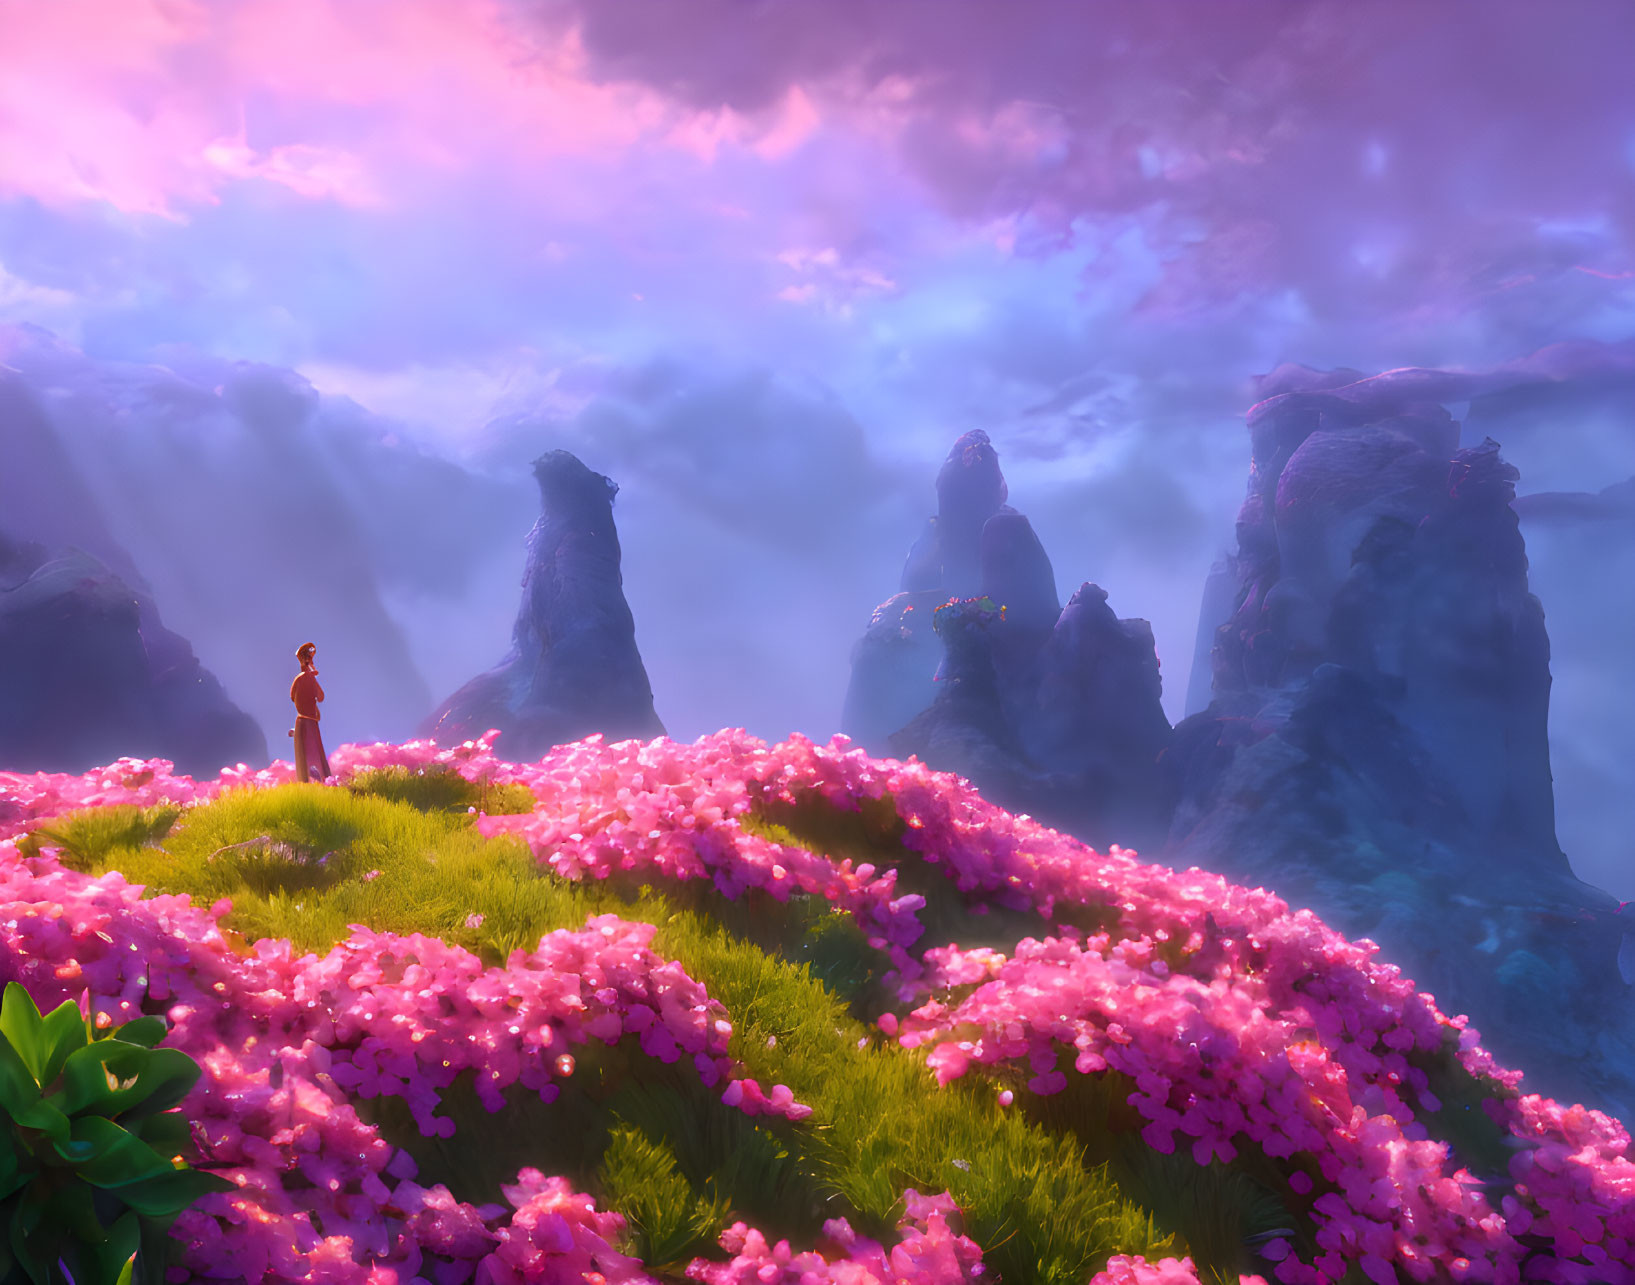 Person standing on lush hill with pink flowers, overlooking misty rock formations under vibrant sky